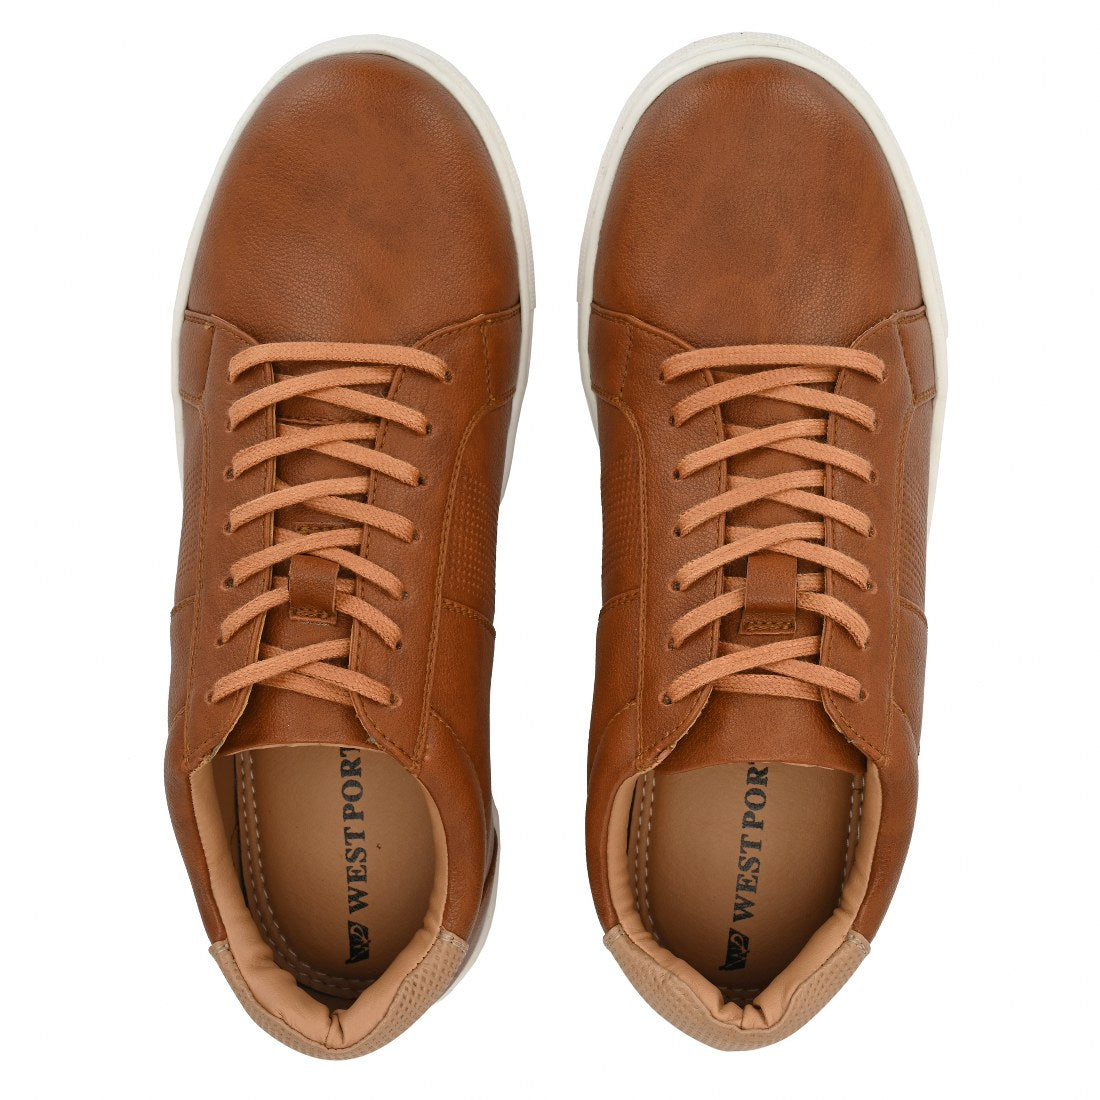 FUN-54 MEN NON-LEATHER TAN CASUAL LACE UP SNEAKERS